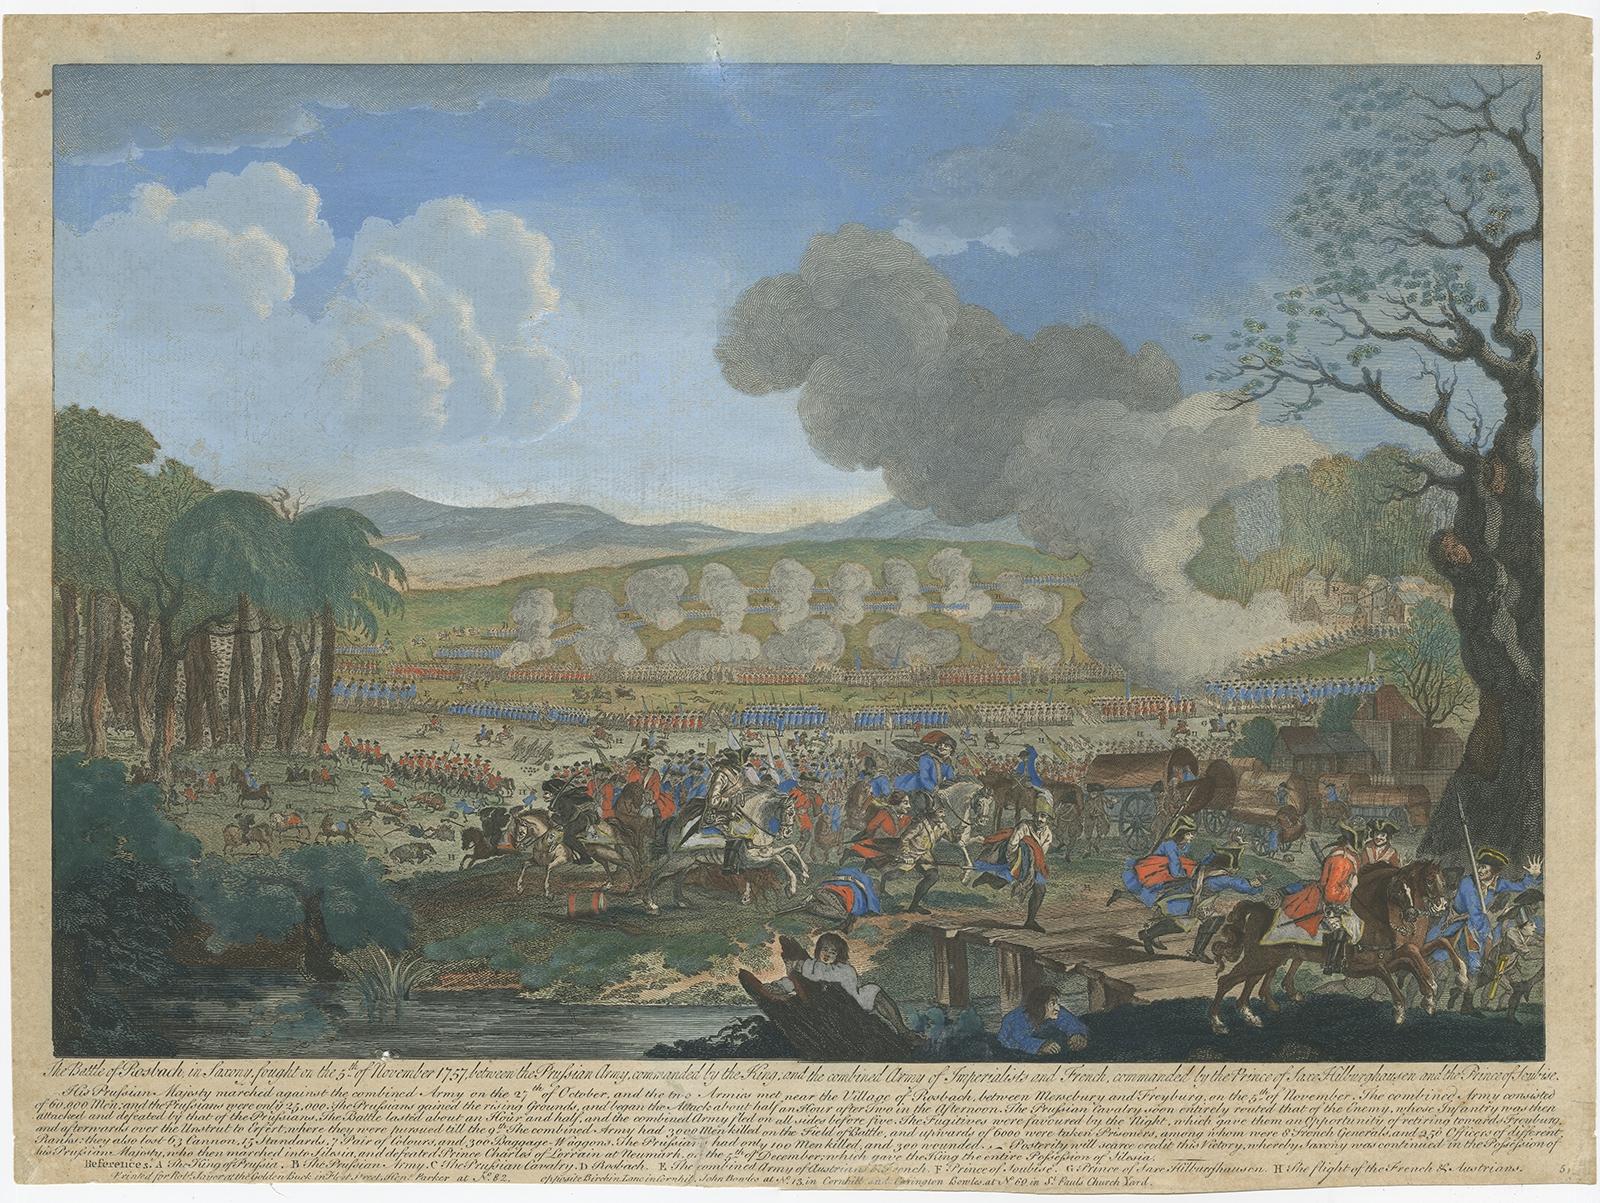 Antique print titled 'The Battle of Rosbach in Saxony, fought on the 5th of November 1757 (..)'. 

Antique print depicting the Battle of Rossbach in Prussian Saxony. Frederick the Great defeated the allied armies of France and the Holy